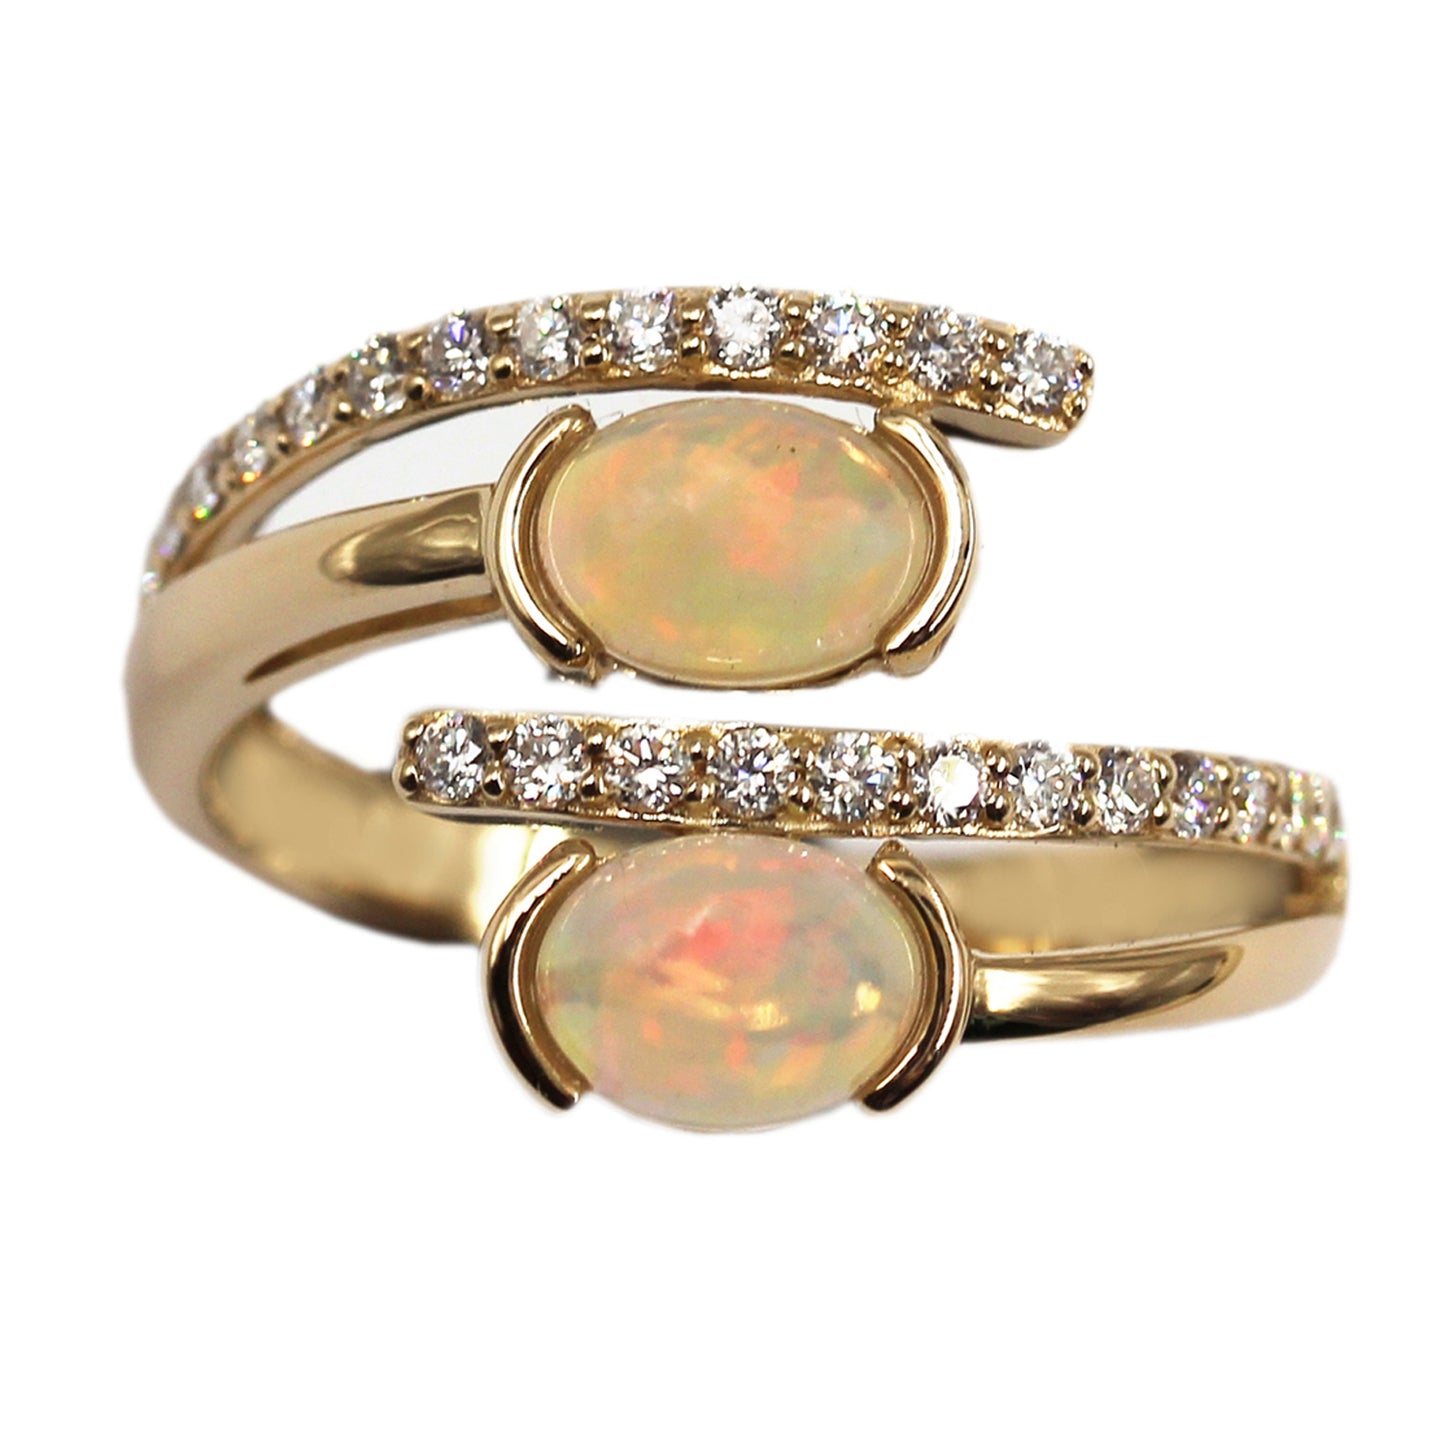 14kt Yellow Gold Ethiopian Opal With Diamond Ring - Pinctore